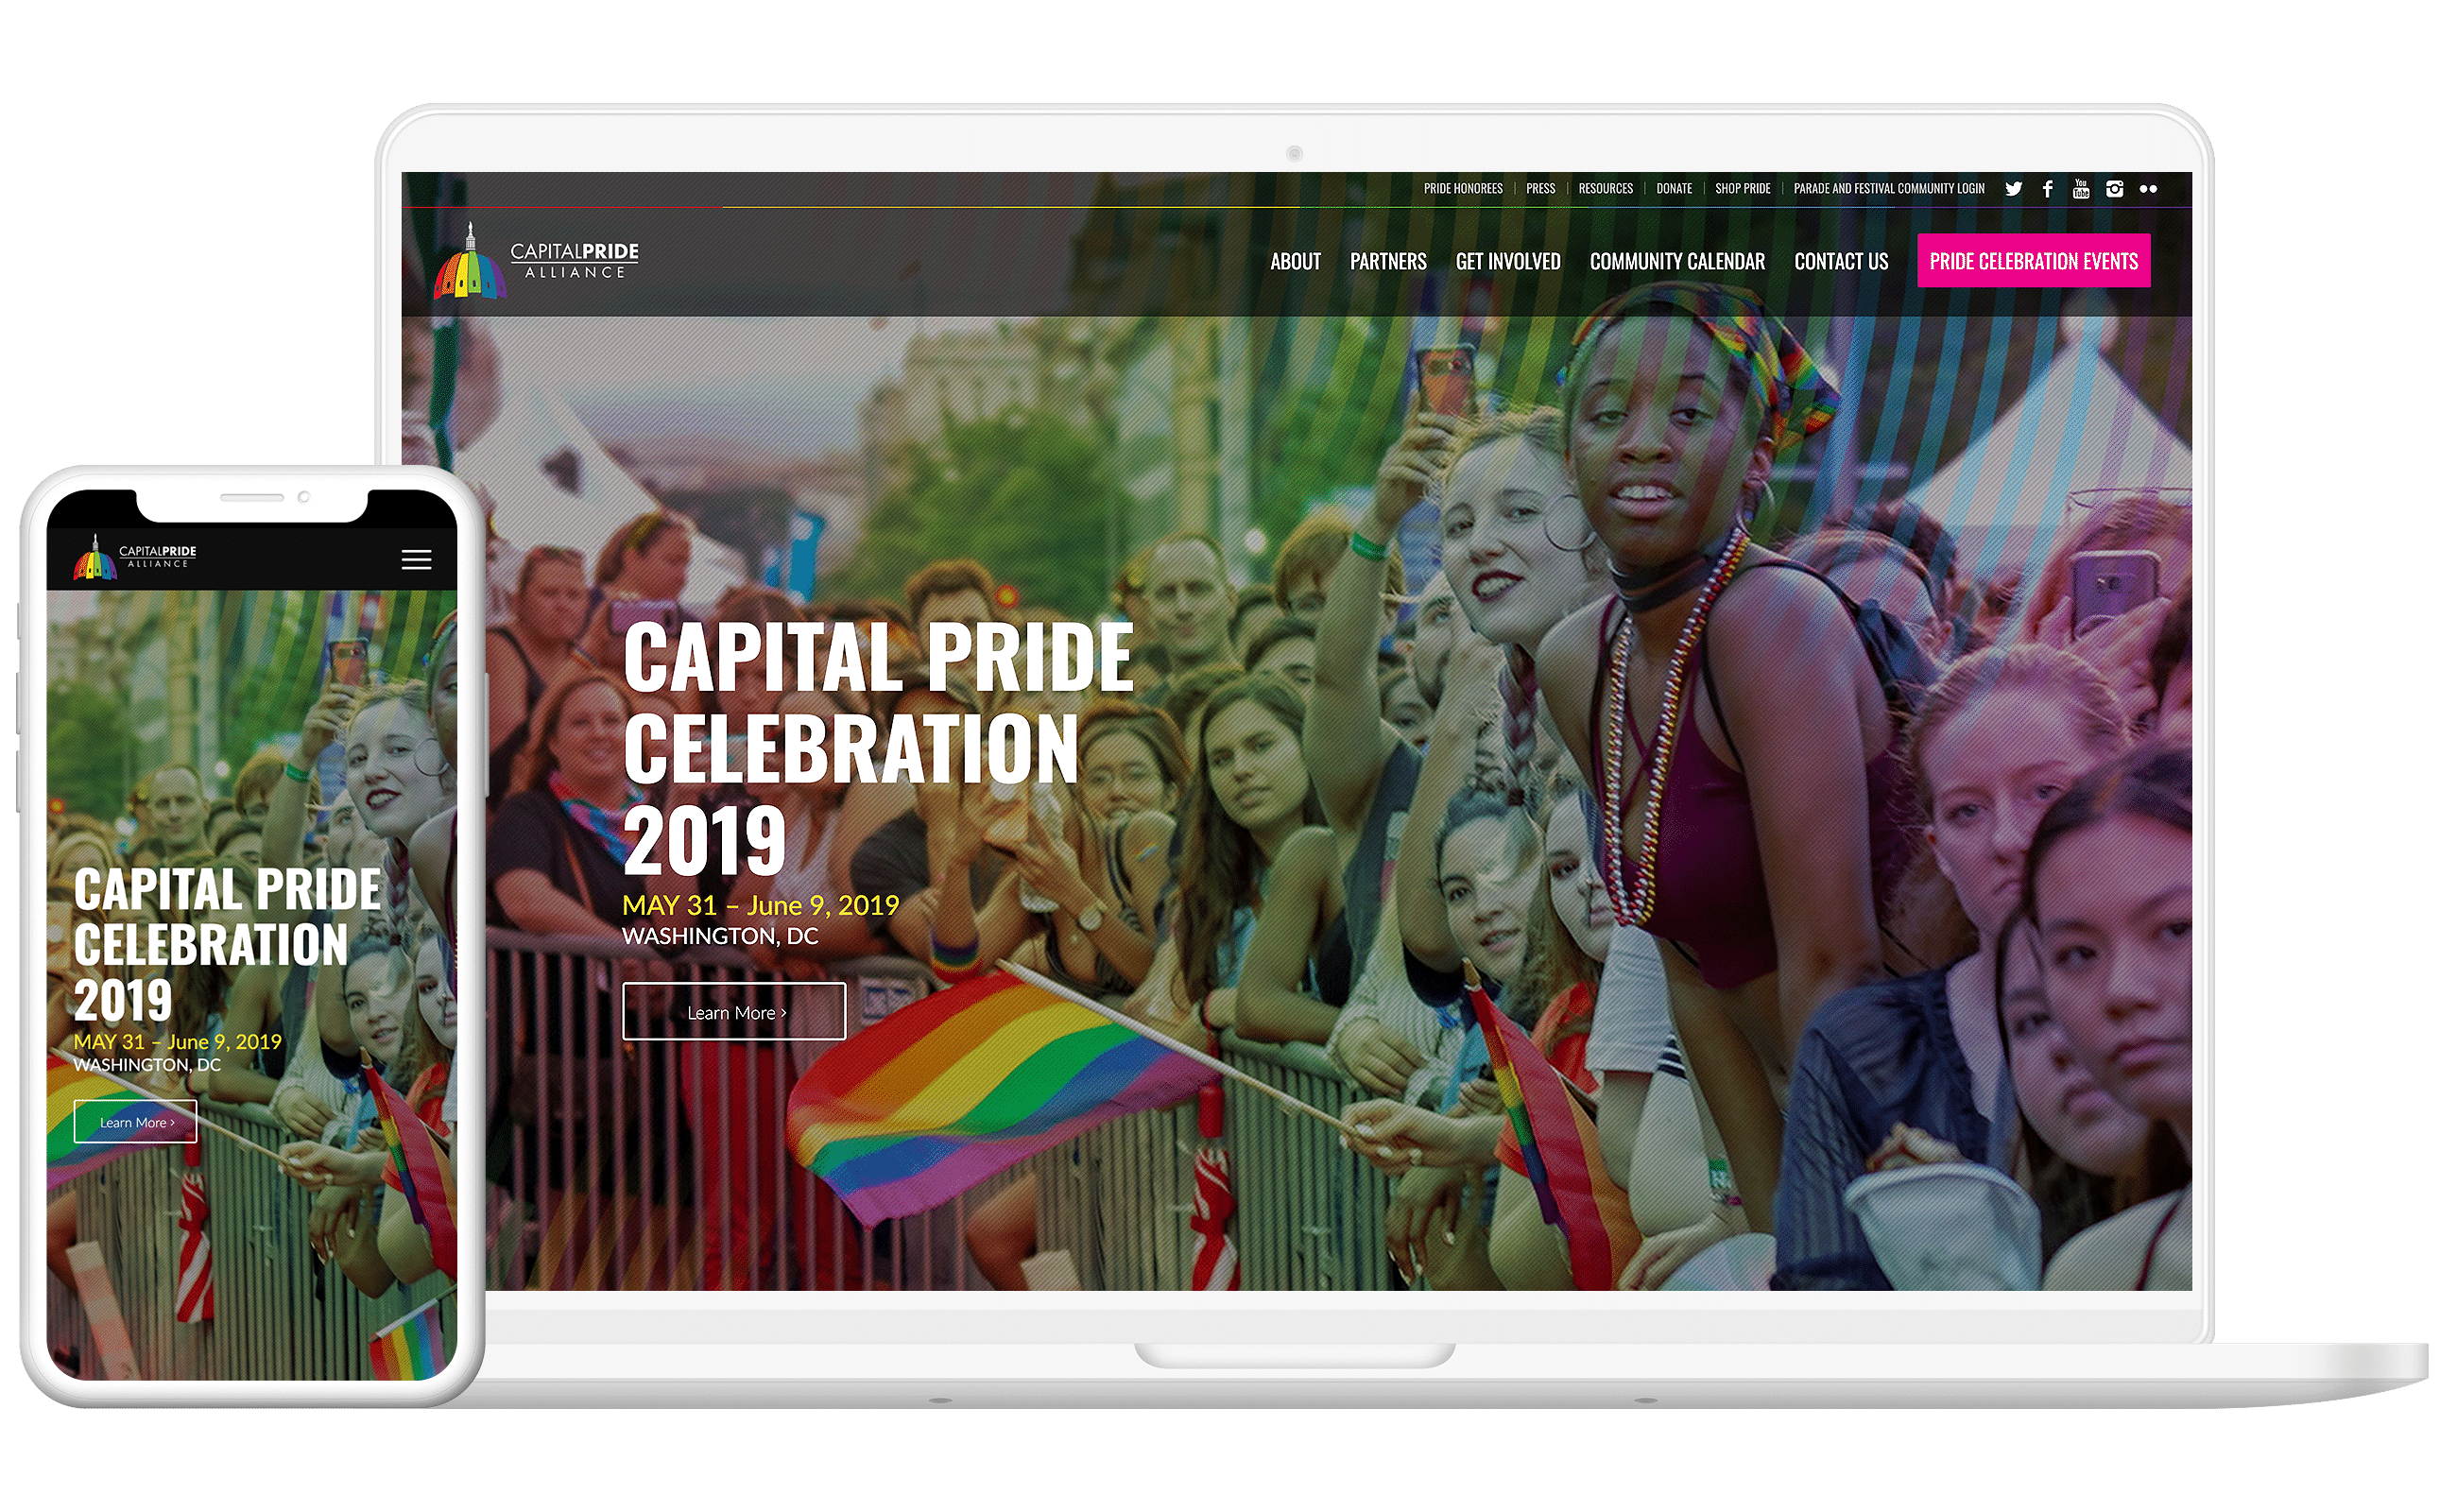 Punch -Capital Pride Website Design in Mobile and Desktop Devices